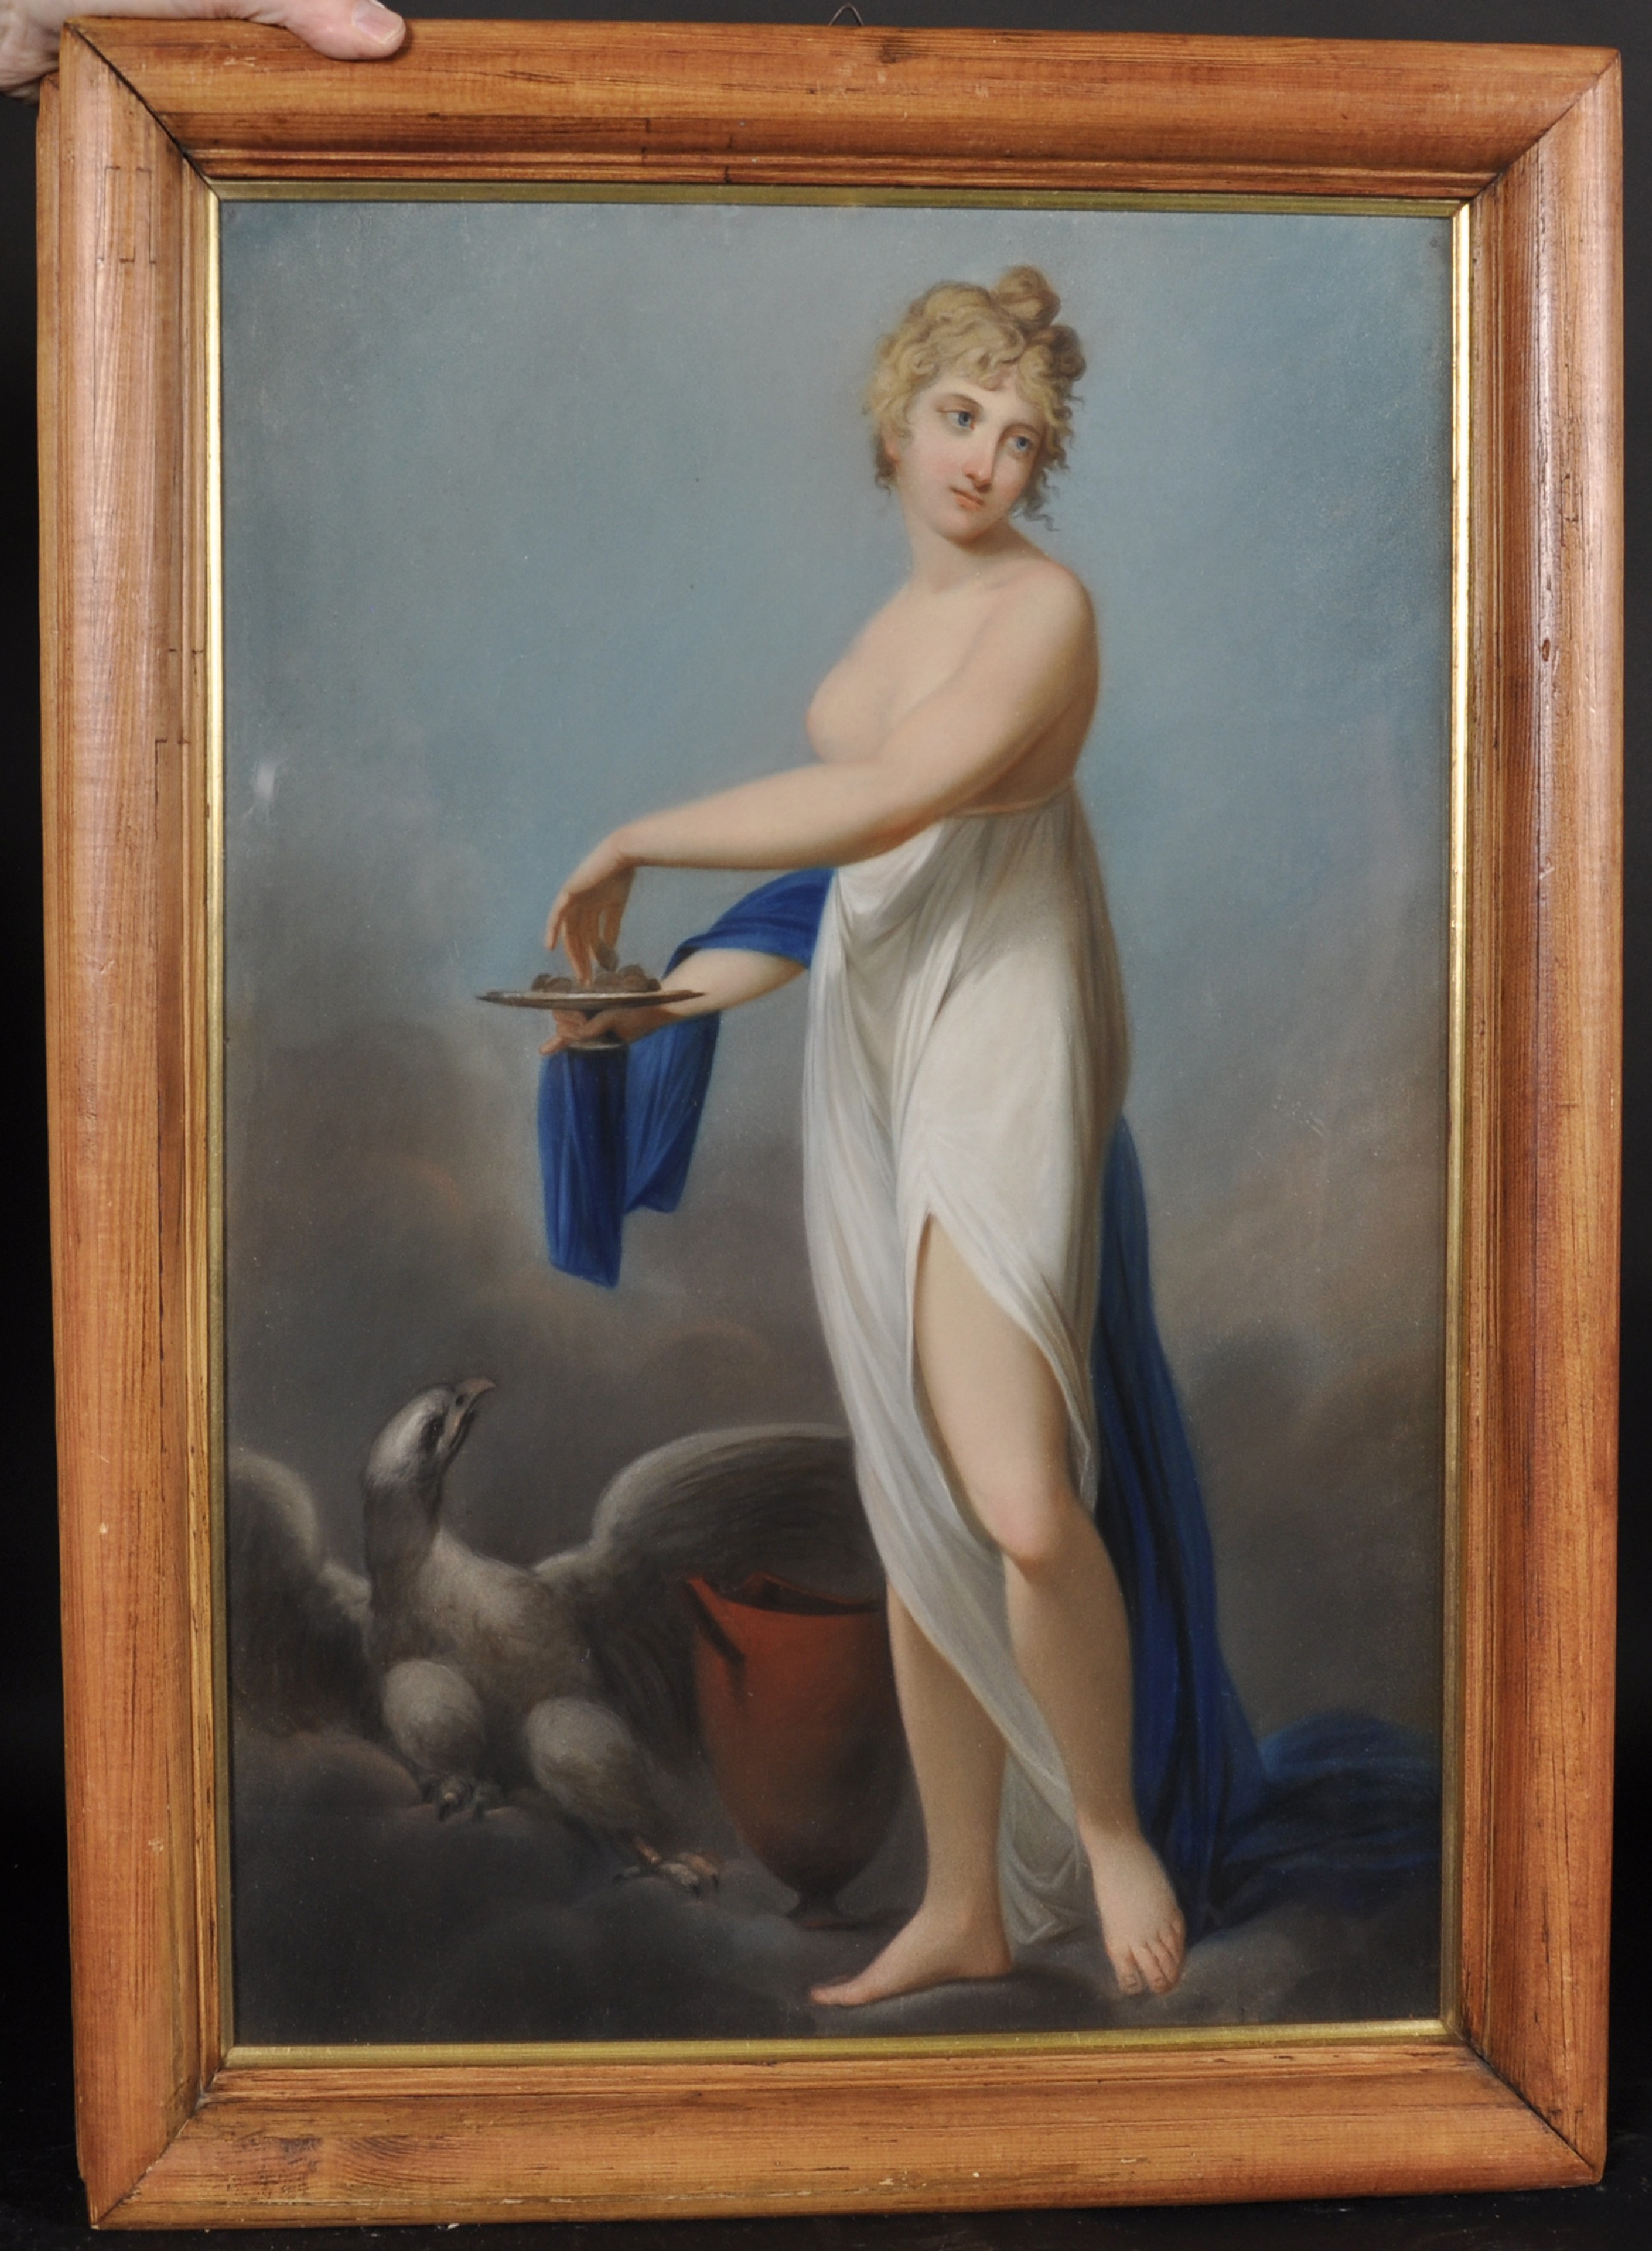 19th Century French School. Study of a Boy holding up a Cup, Pastel, 24.5" x 17.5", and the - Image 4 of 5